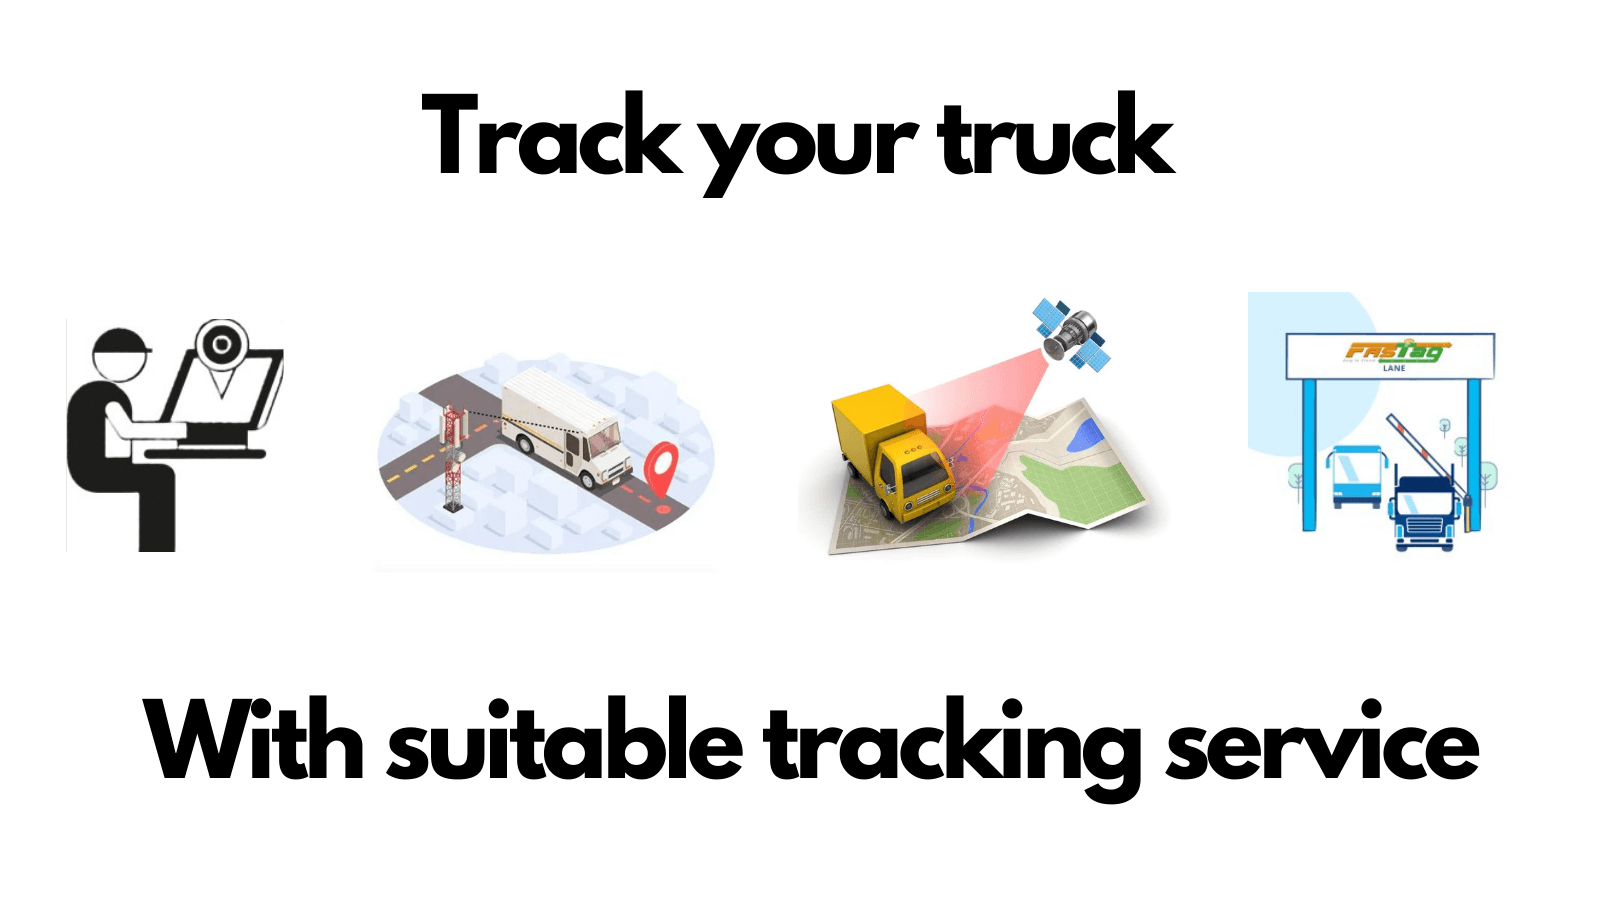 Choose the best tracking system to track your truck